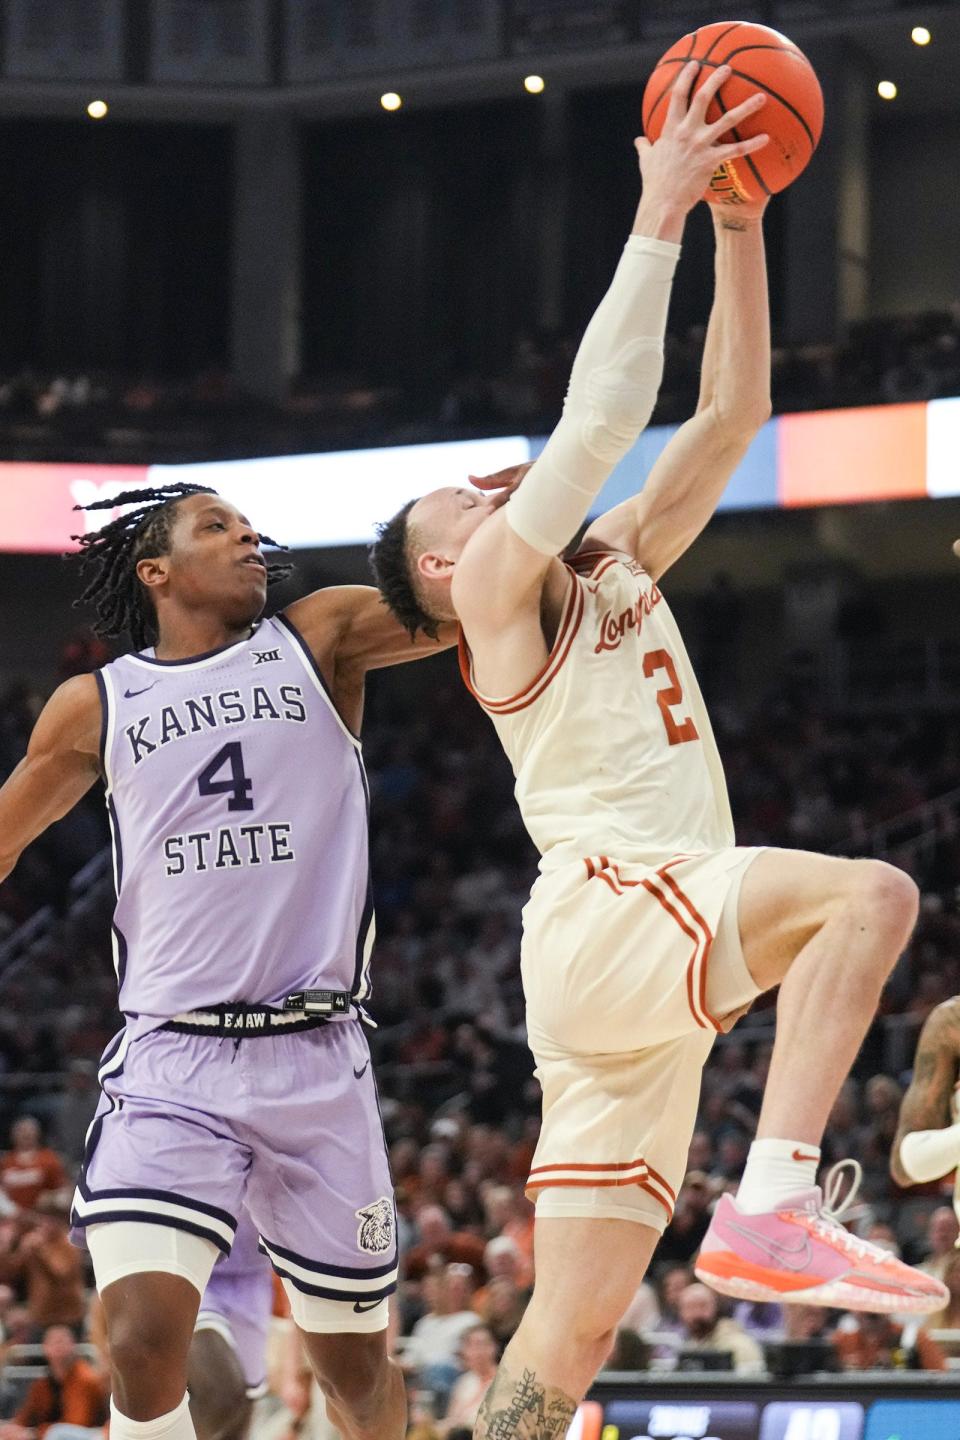 Kansas State guard Dai Dai Ames, left, fouls Texas Longhorns guard Chendall Weaver on a drive to the basket late in Texas' 64-59 win Monday at Moody Center. Ames got ejected for the flagrant foul and Texas went on to get a needed Big 12 win.